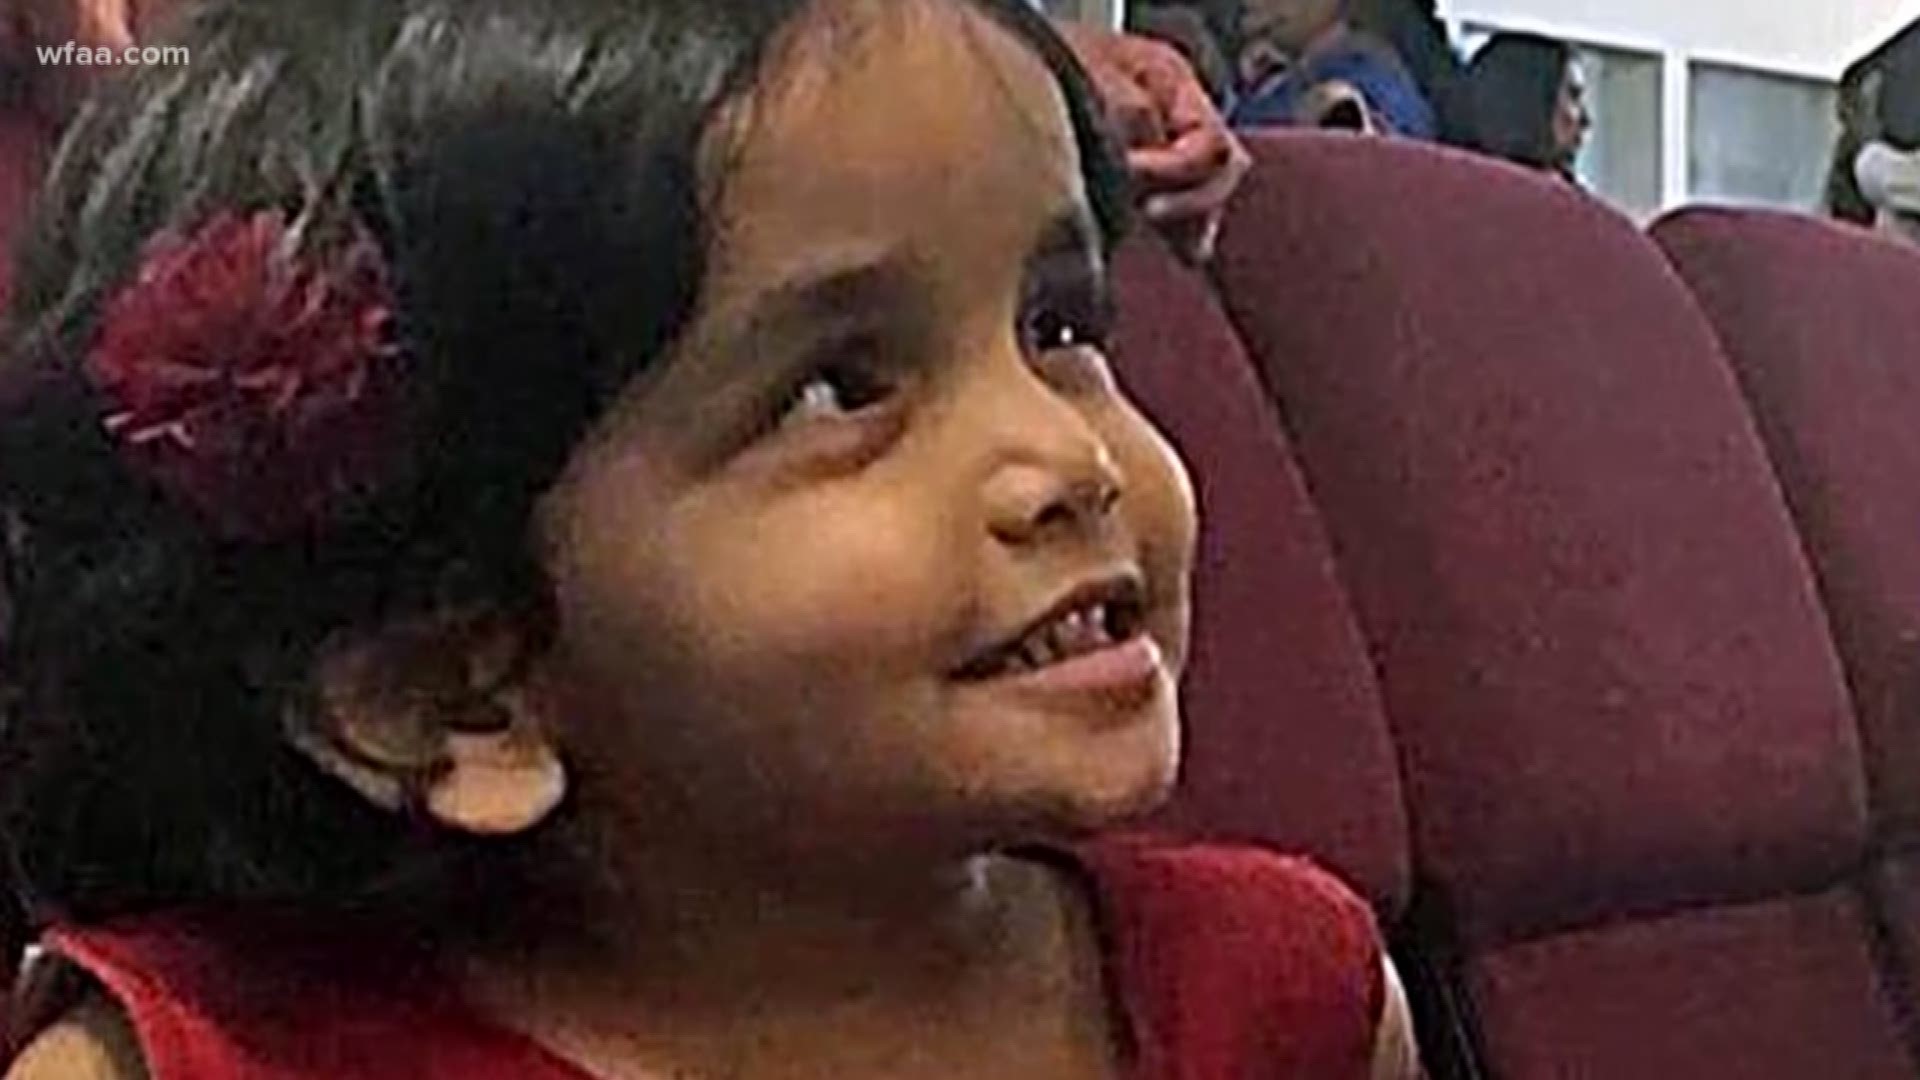 Mother and father of Sherin Mathews indicted